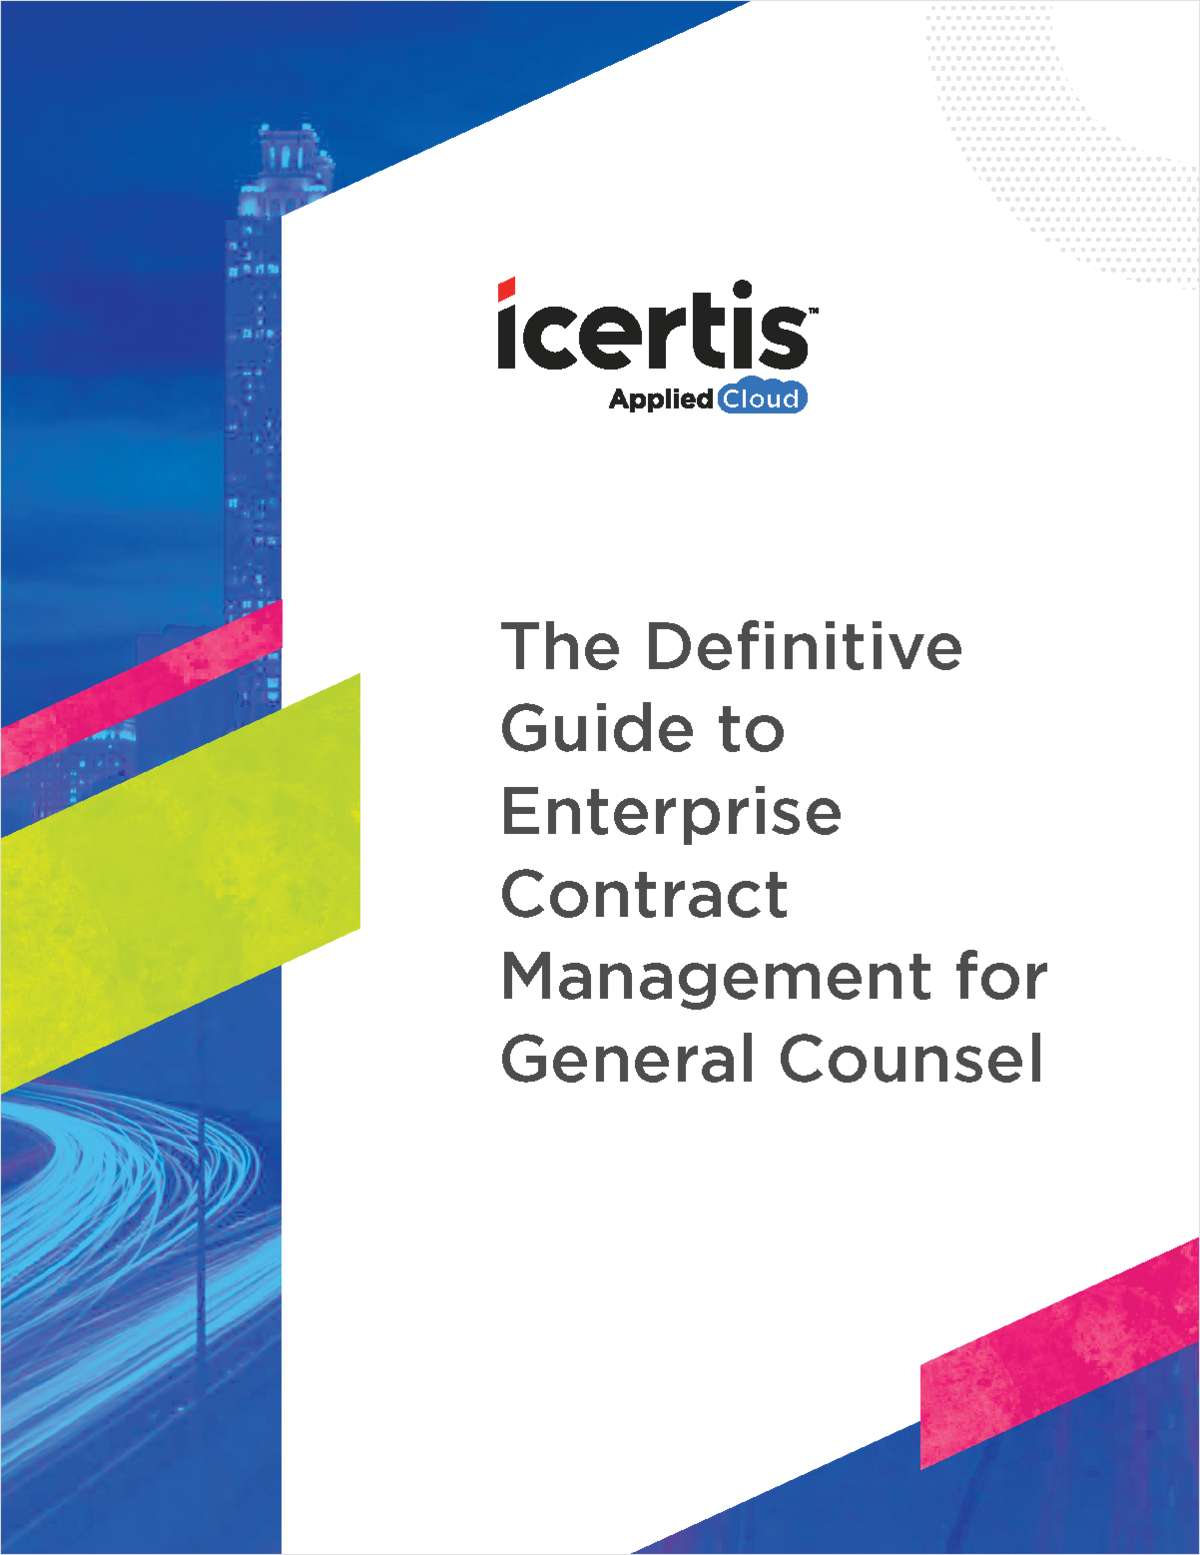 The Definitive Guide to Enterprise Contract Management for General Counsel